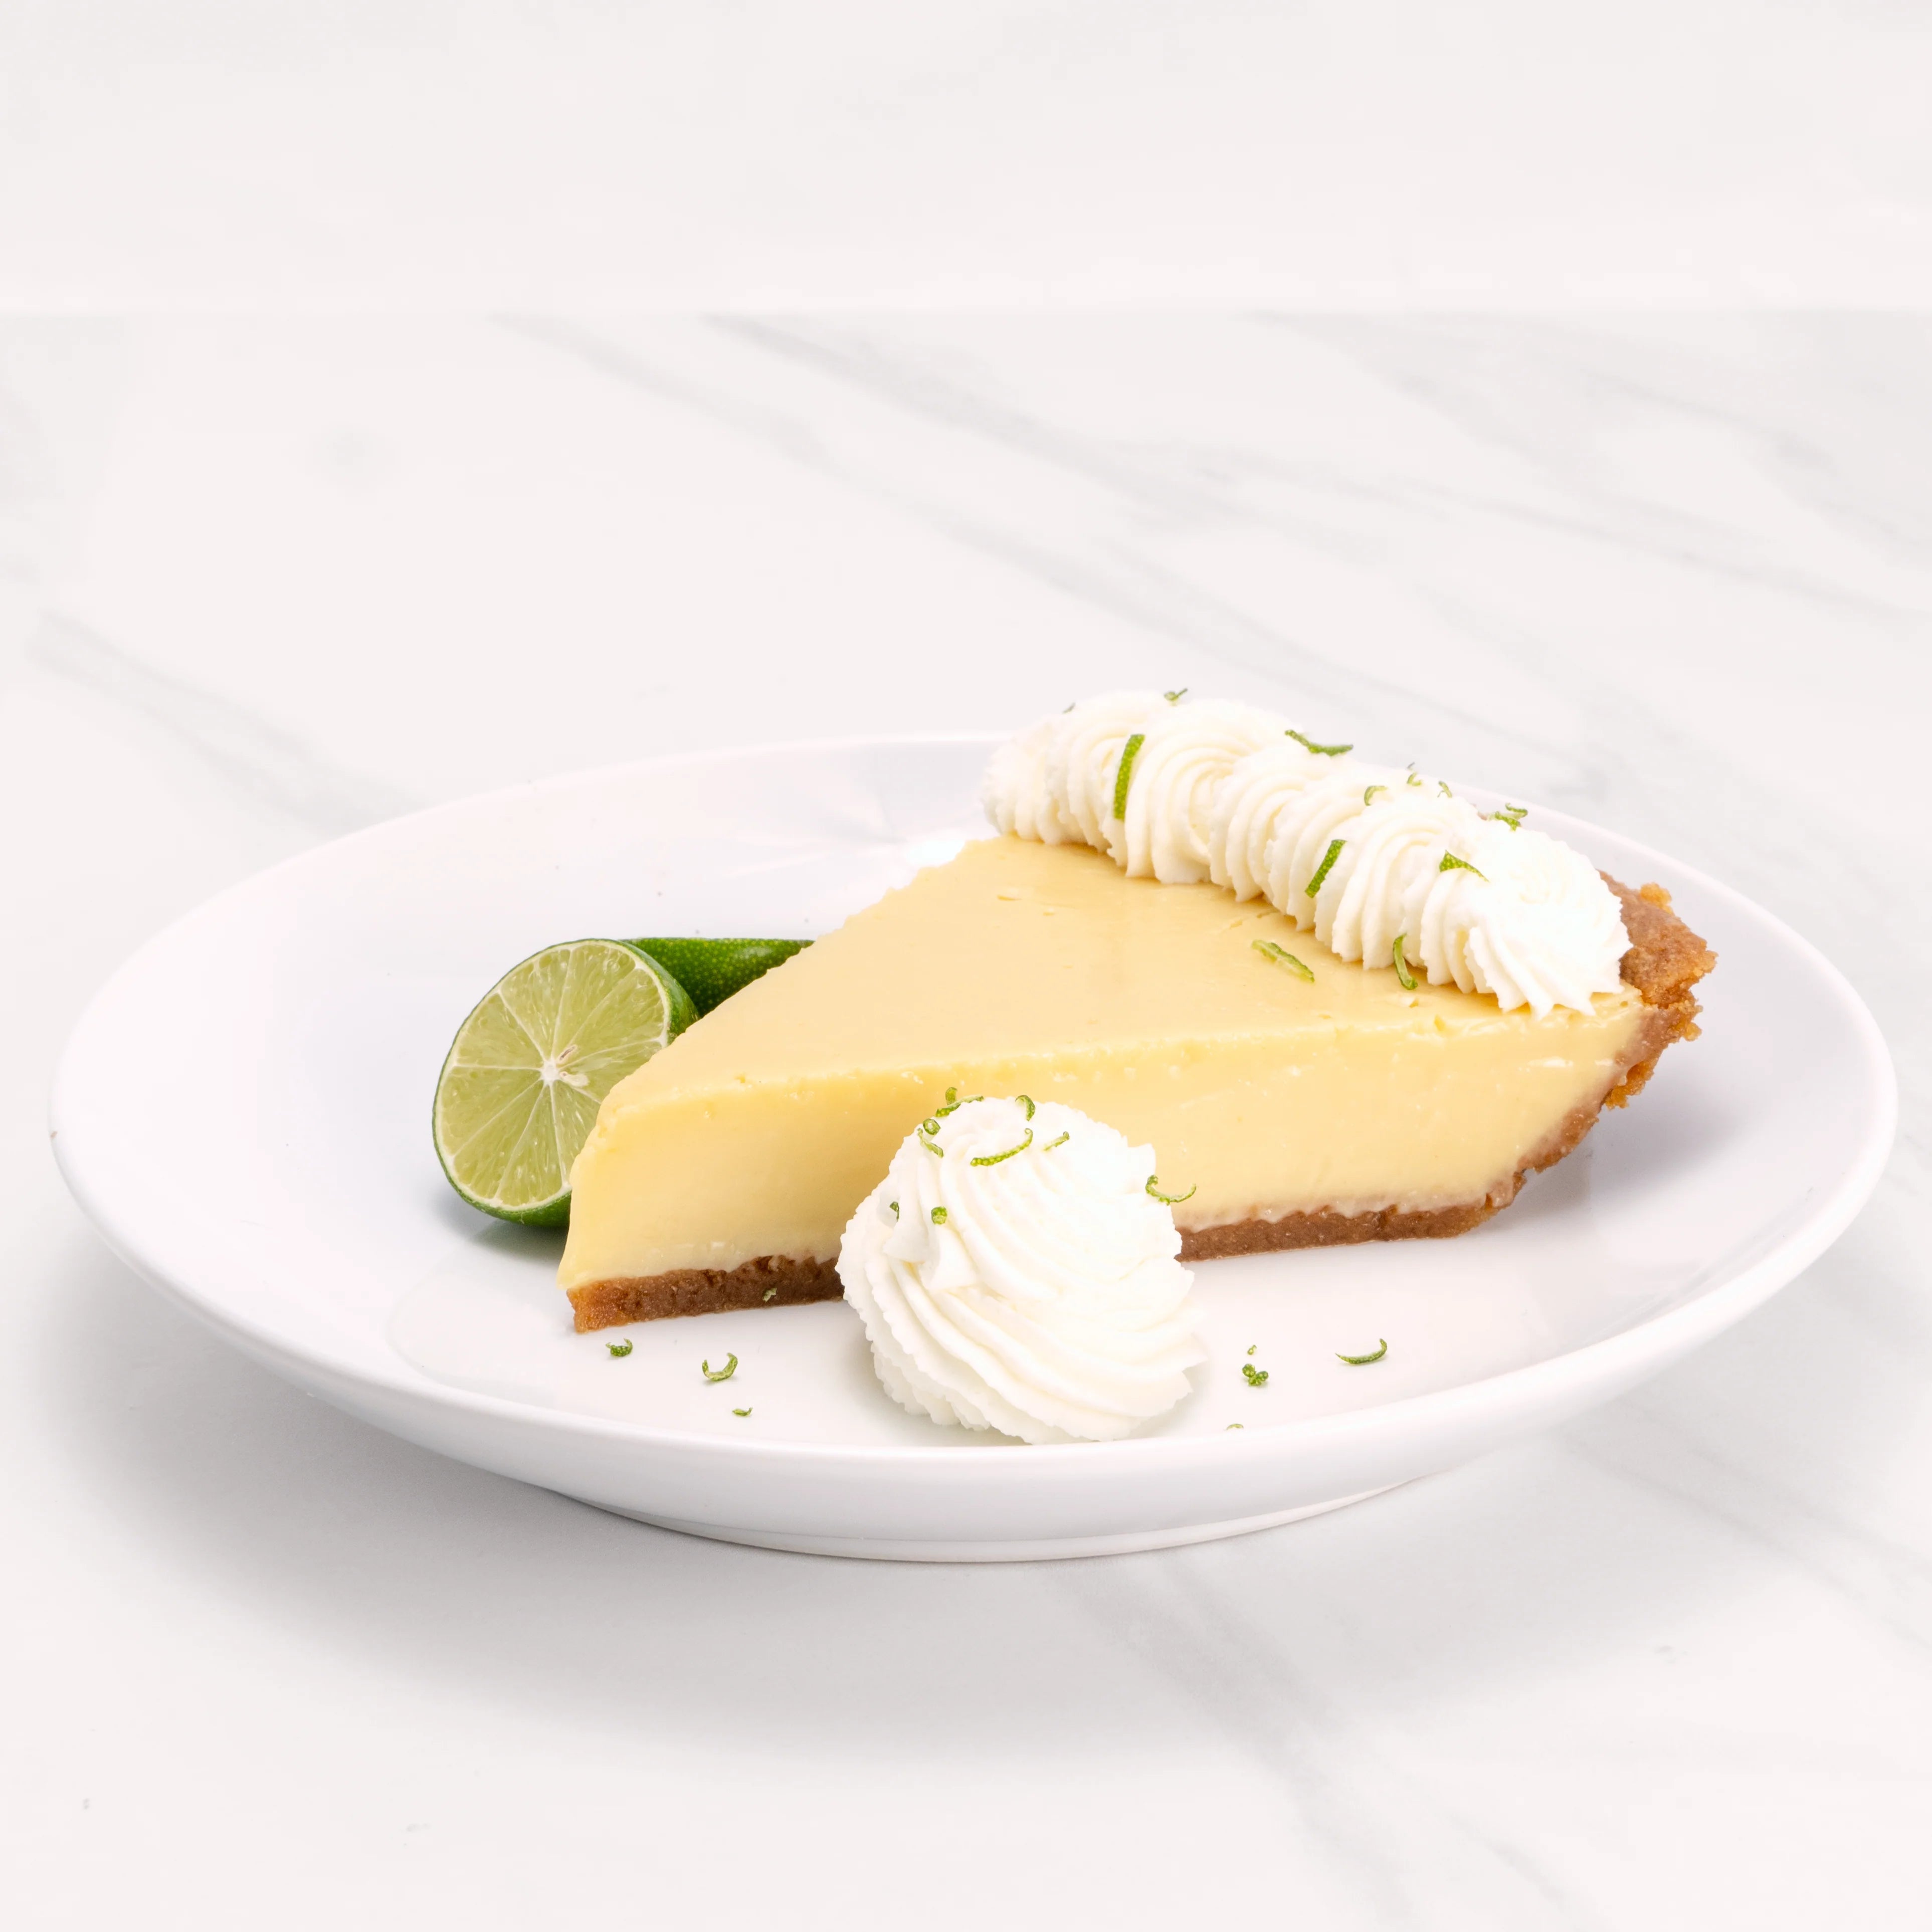 Slice of Key Lime Pie garnished with lime and a dollop of crème.